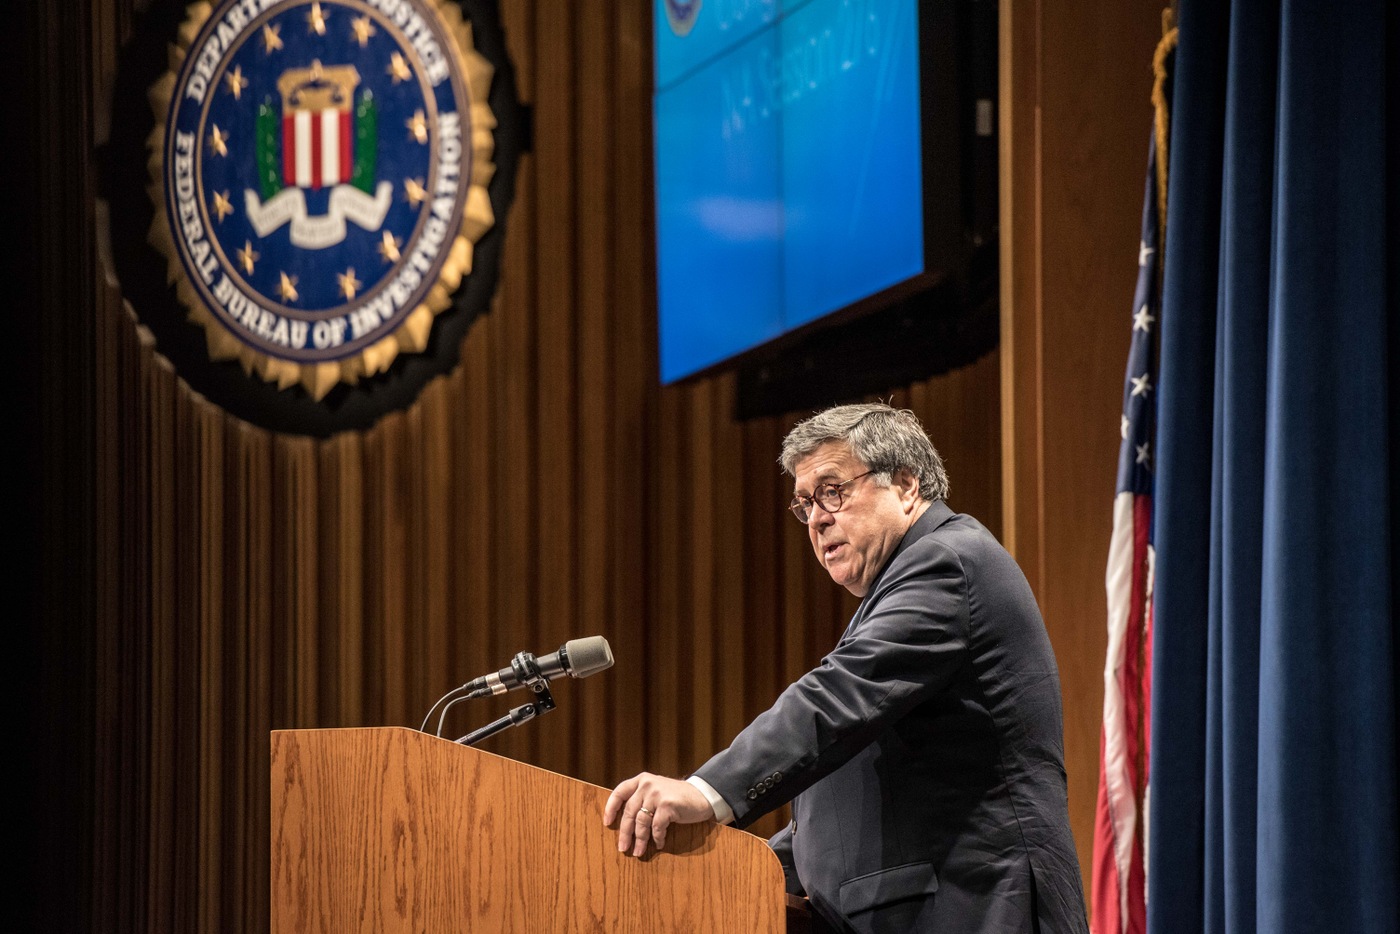 Attorney General William Barr addresses the 276th graduating class of the National Academy on June 7, 2019